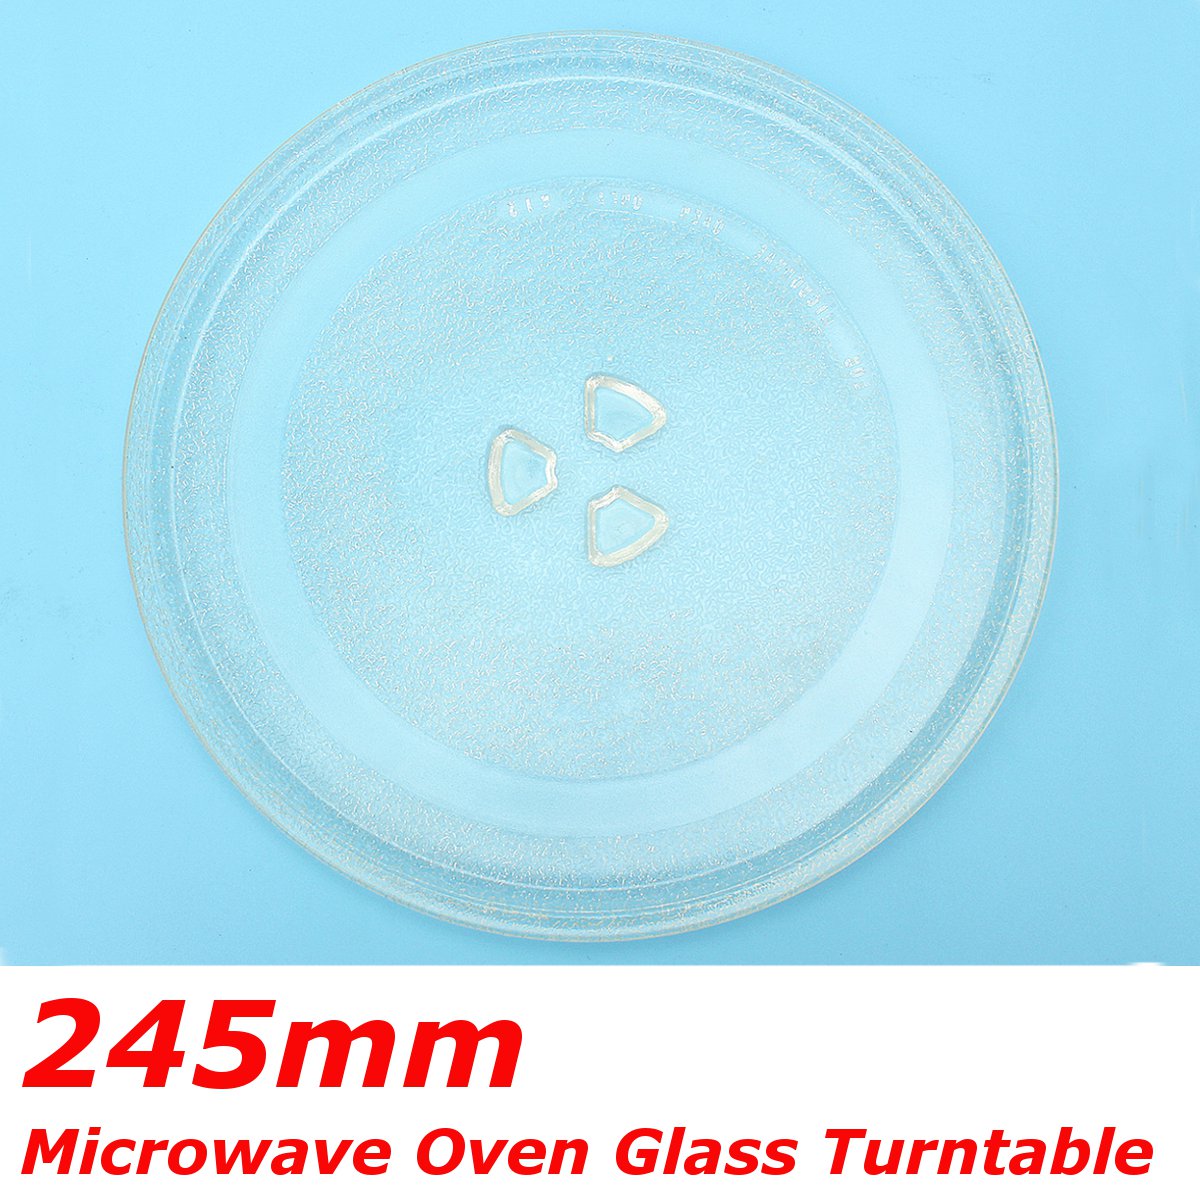 Microwave-Oven-Glass-Turntable-Plate-Platter-245-mm-Suits-Many-Brand-1291265